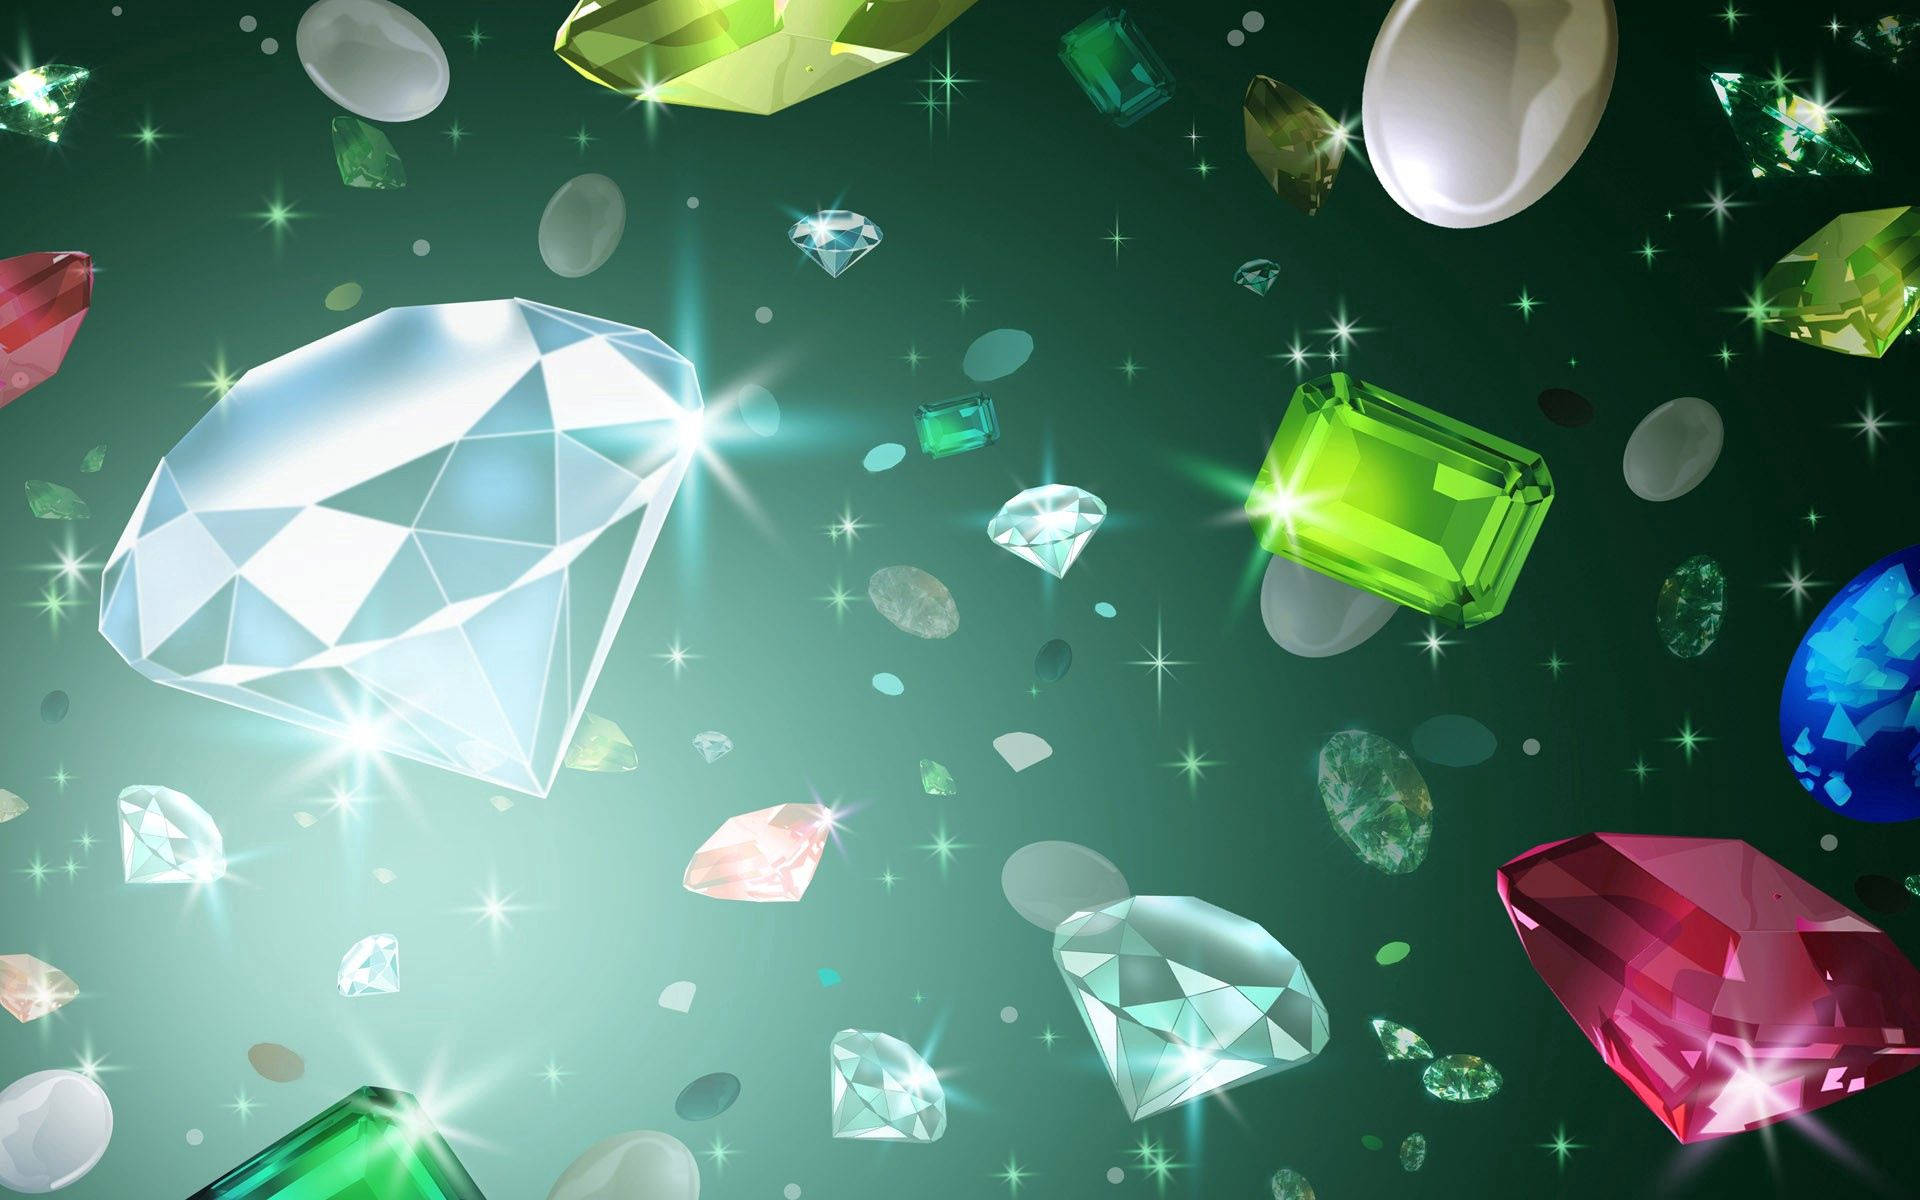 "Shine brightly with these exquisite diamonds!" Wallpaper